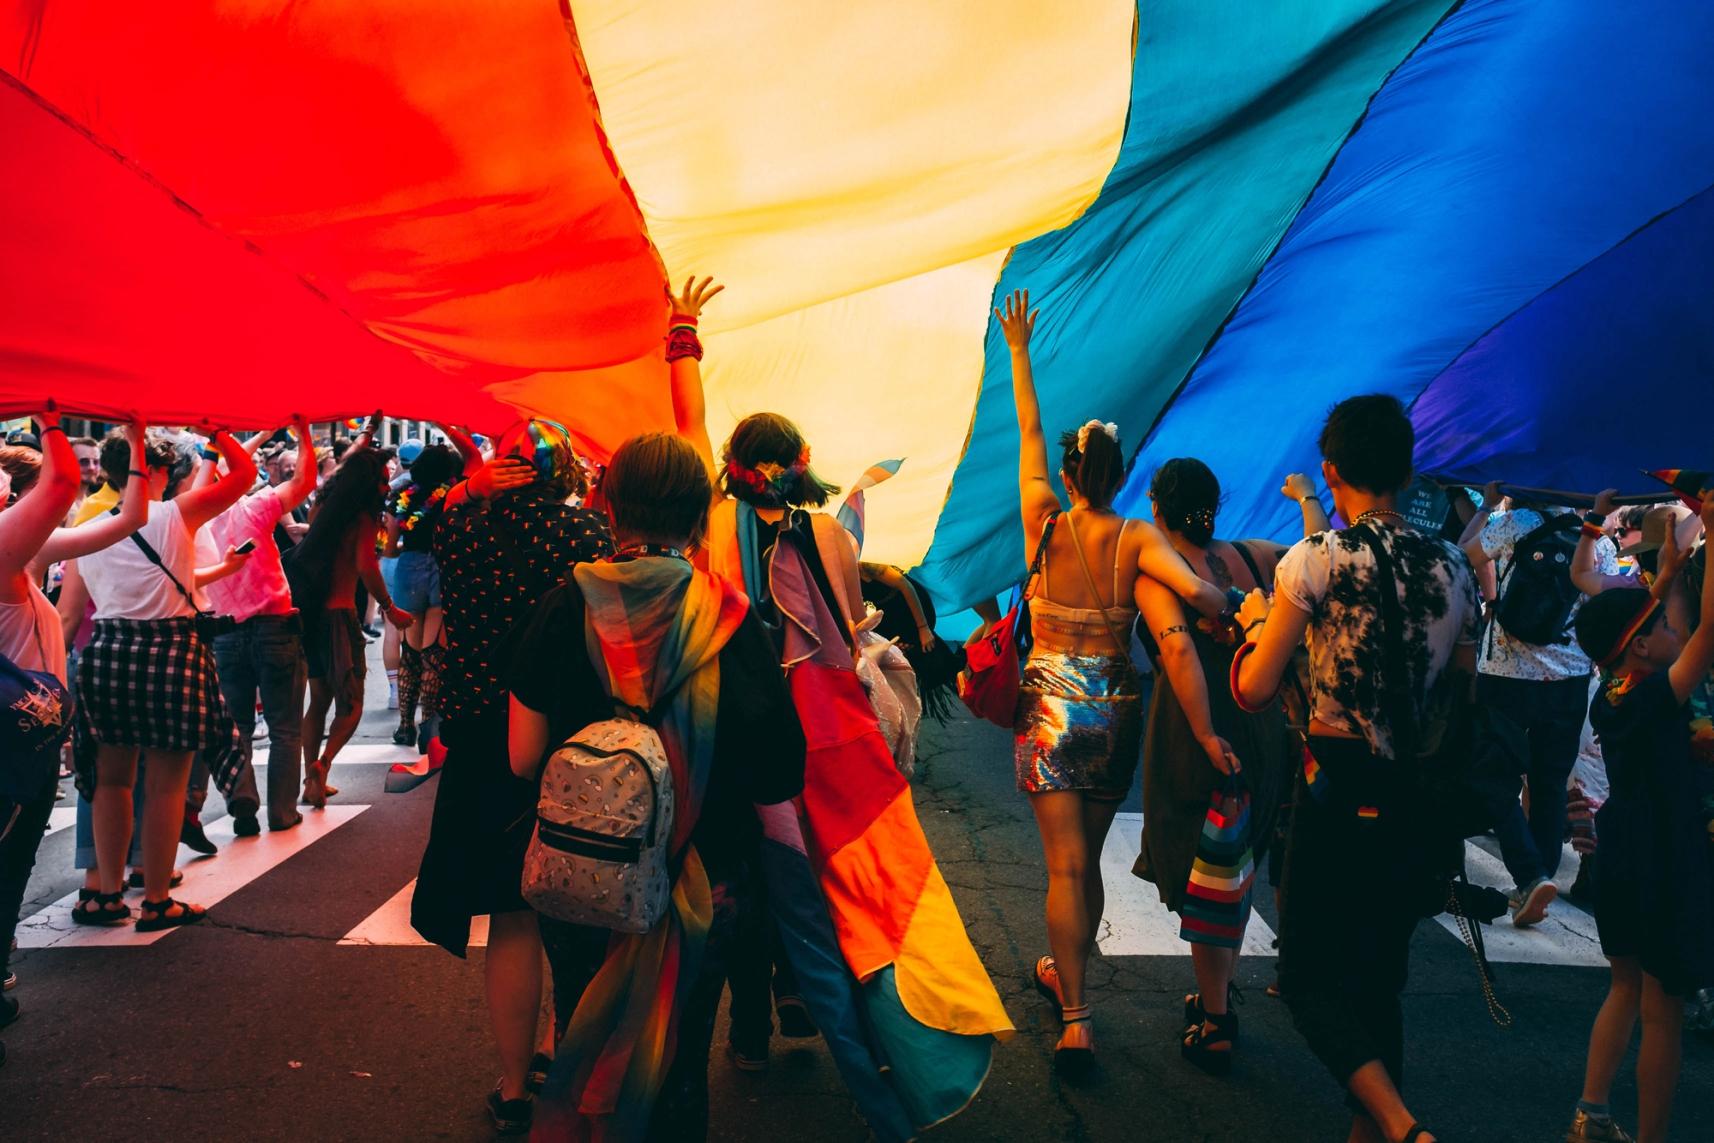 A group of people holding a large rainbow flag over them.